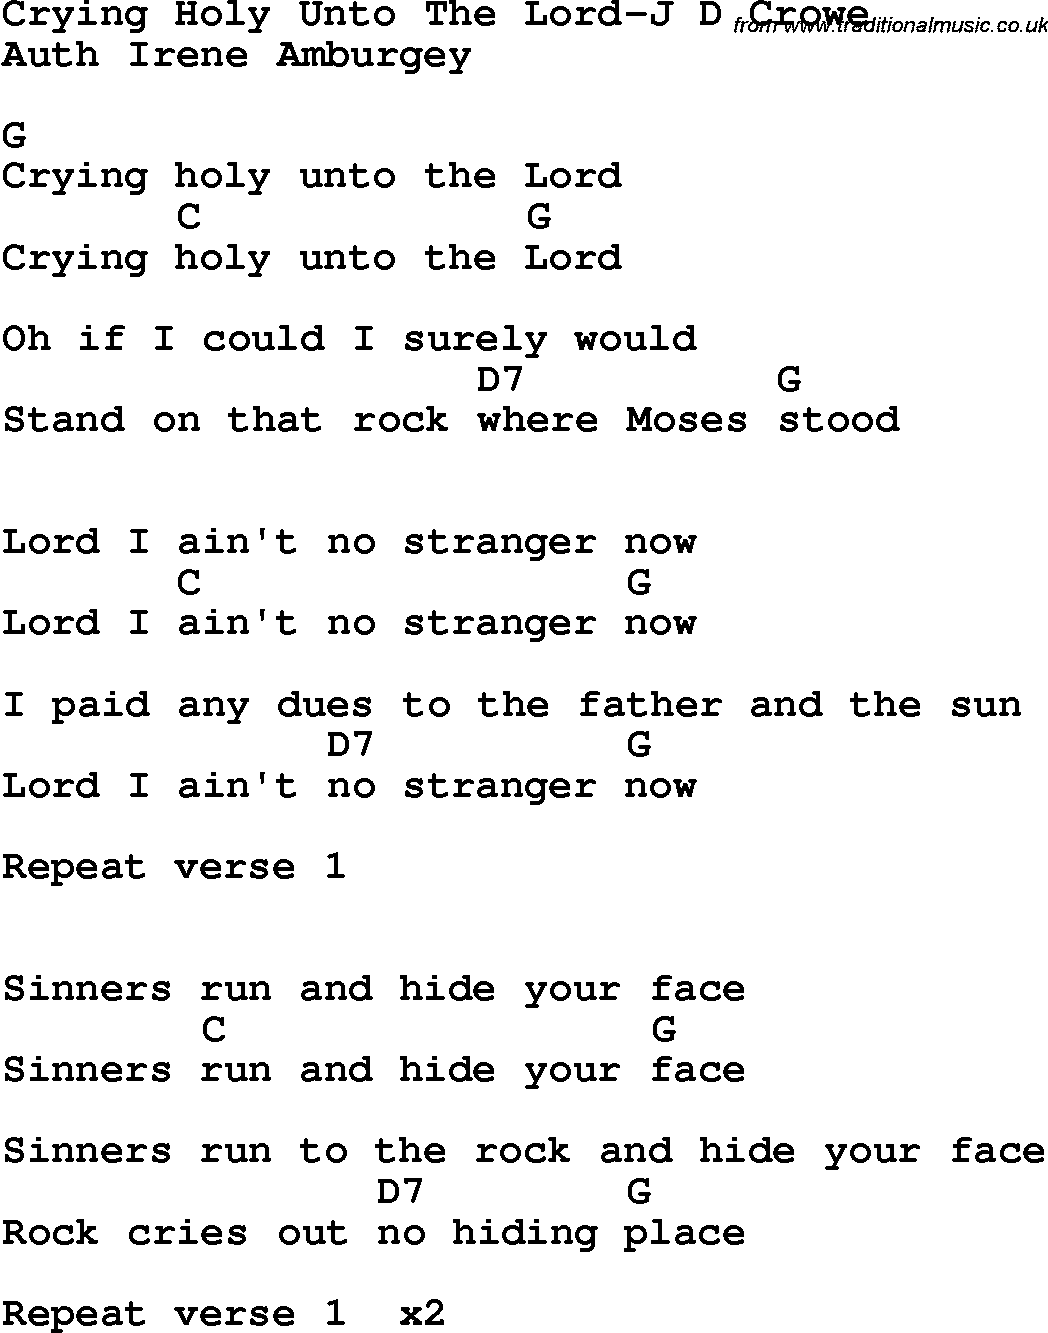 Country, Southern and Bluegrass Gospel Song Crying Holy Unto The Lord-J D Crowe lyrics and chords